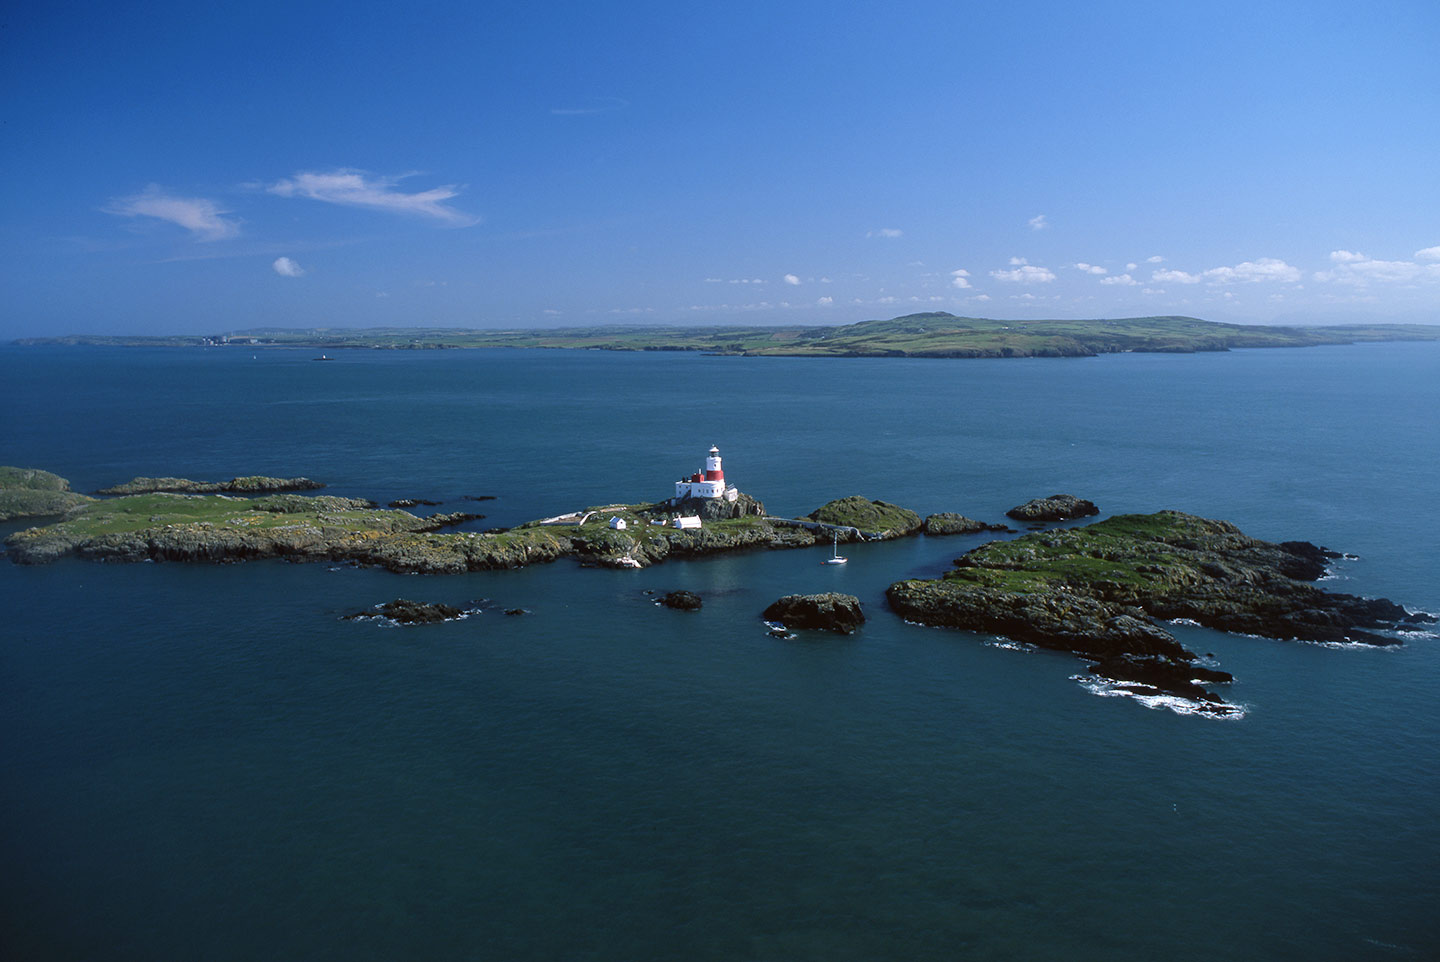 Image of the Skerries lighthouse and islands, North Wales